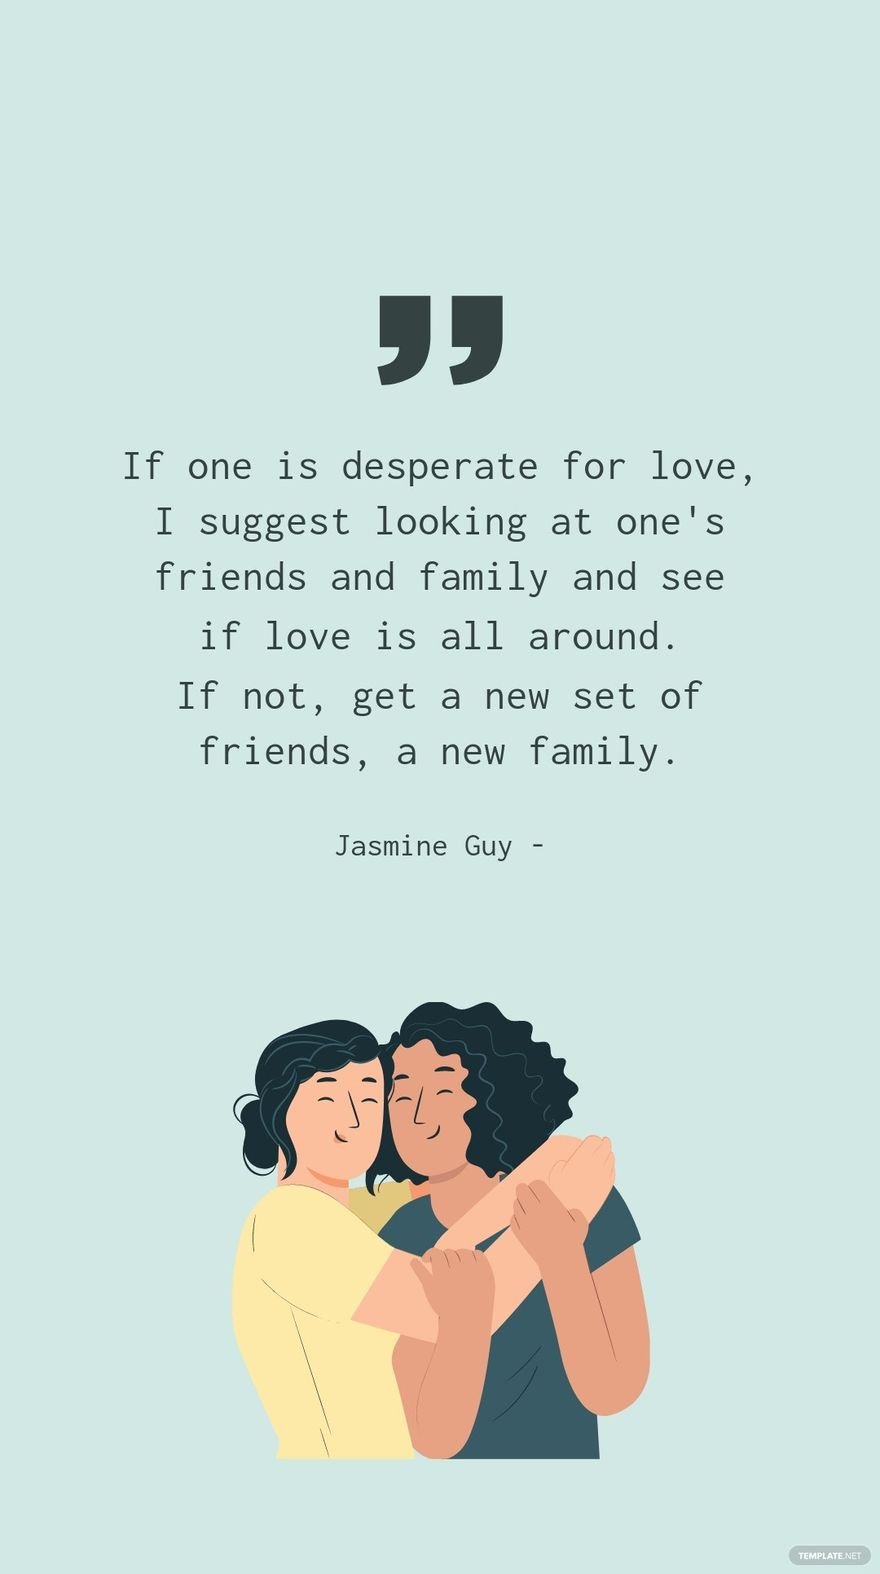 Jasmine Guy - If one is desperate for love, I suggest looking at one's friends and family and see if love is all around. If not, get a new set of friends, a new family.